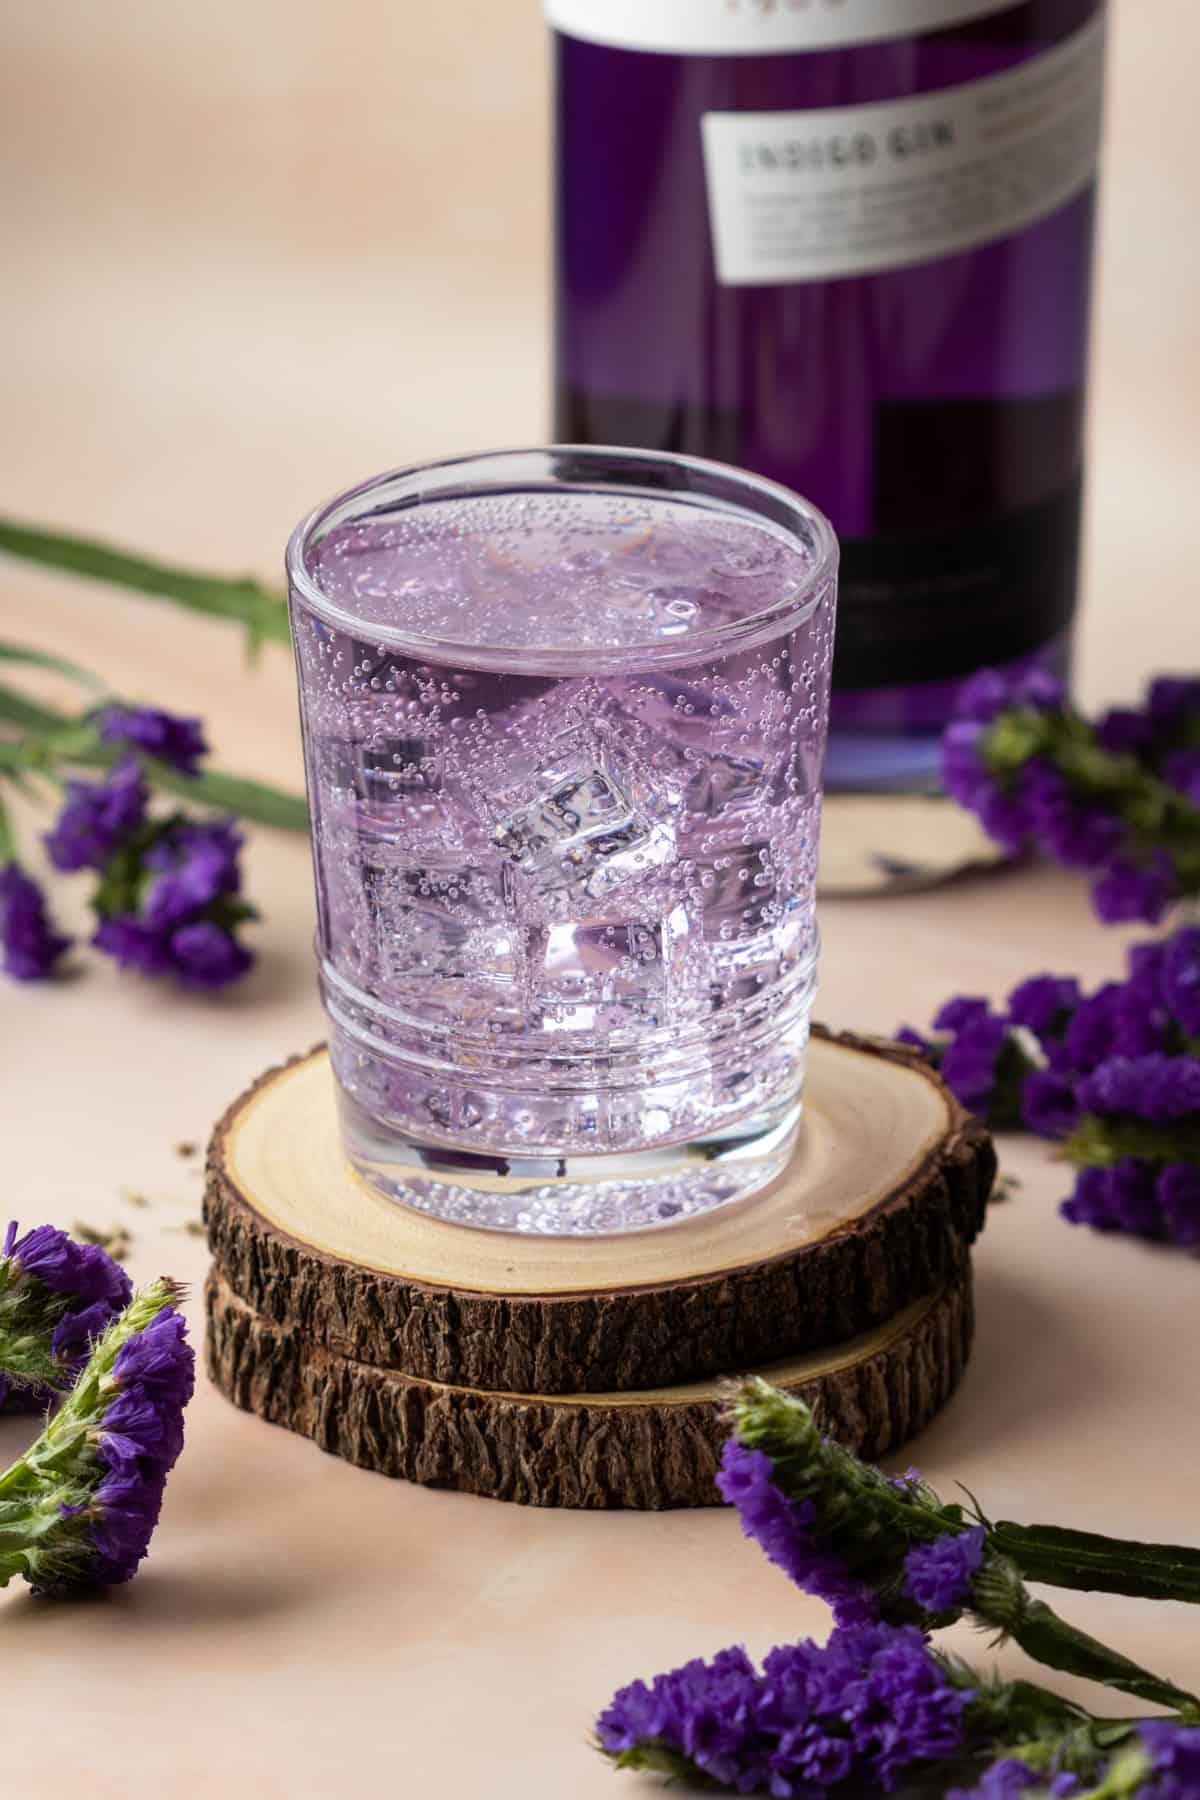 Lavender gin and tonic on two wooden coasters with Empress gin bottle in the background and purple flowers.